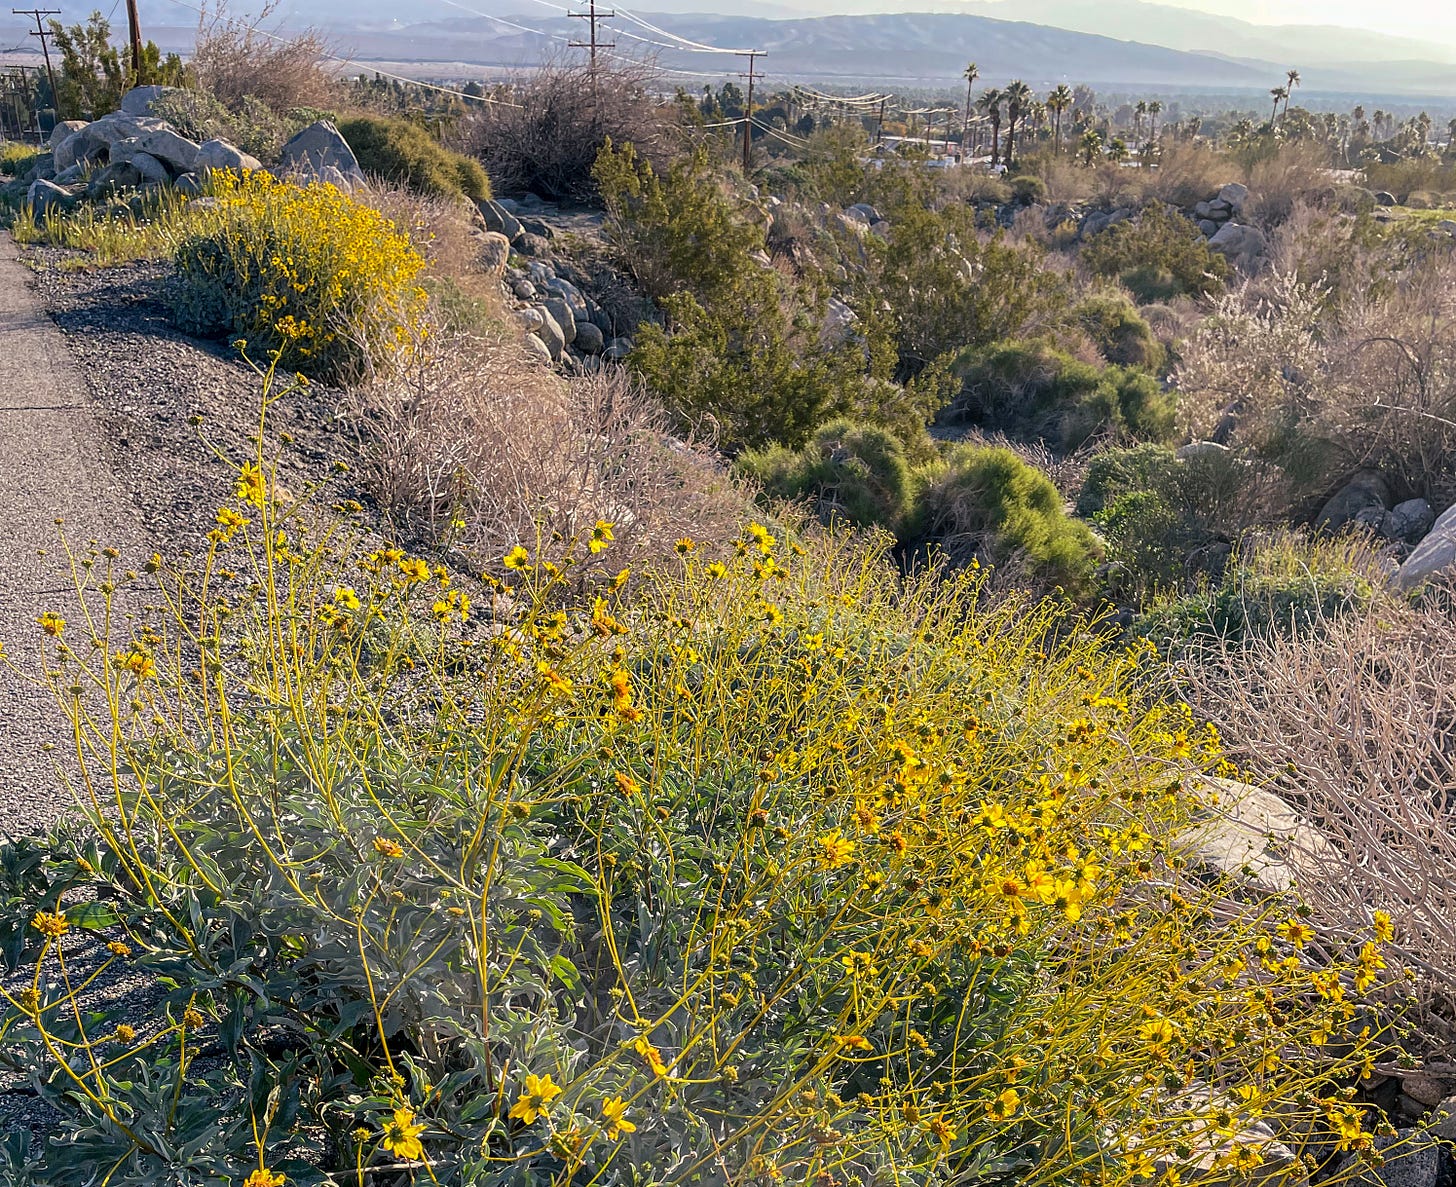 A desert shrub is full of bright yellow wildflowers along the side of the road.